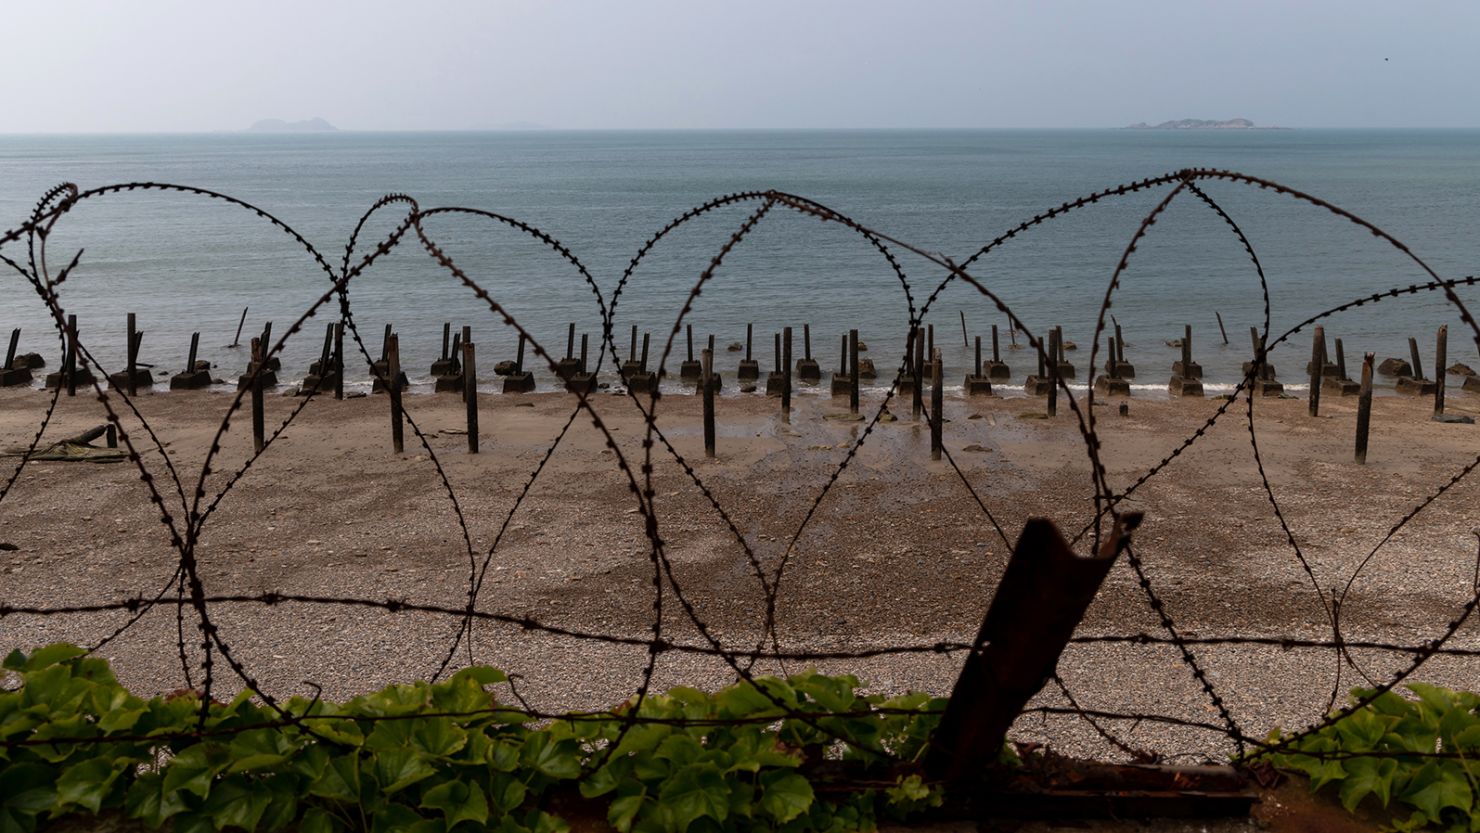 Metal spikes, known as "Dragon's teeth," and razor wire used for fortification sit along a beach as islands belonging to North Korea stand in the distance on Yeonpyeong Island, South Korea, on Friday, June 26, 2020. On the sleepy island of Yeonpyeong, the threat of conflict is constant with North Korean coastal howitzers just 11 kilometers (7 miles) away and propaganda banners visible through binoculars. There have been several military clashes in the contested maritime boundary off the west of the peninsula since 1999, making it a possible ignition point for a major conflict that could draw in the U.S. and China  the two biggest allies for the rival Koreas.